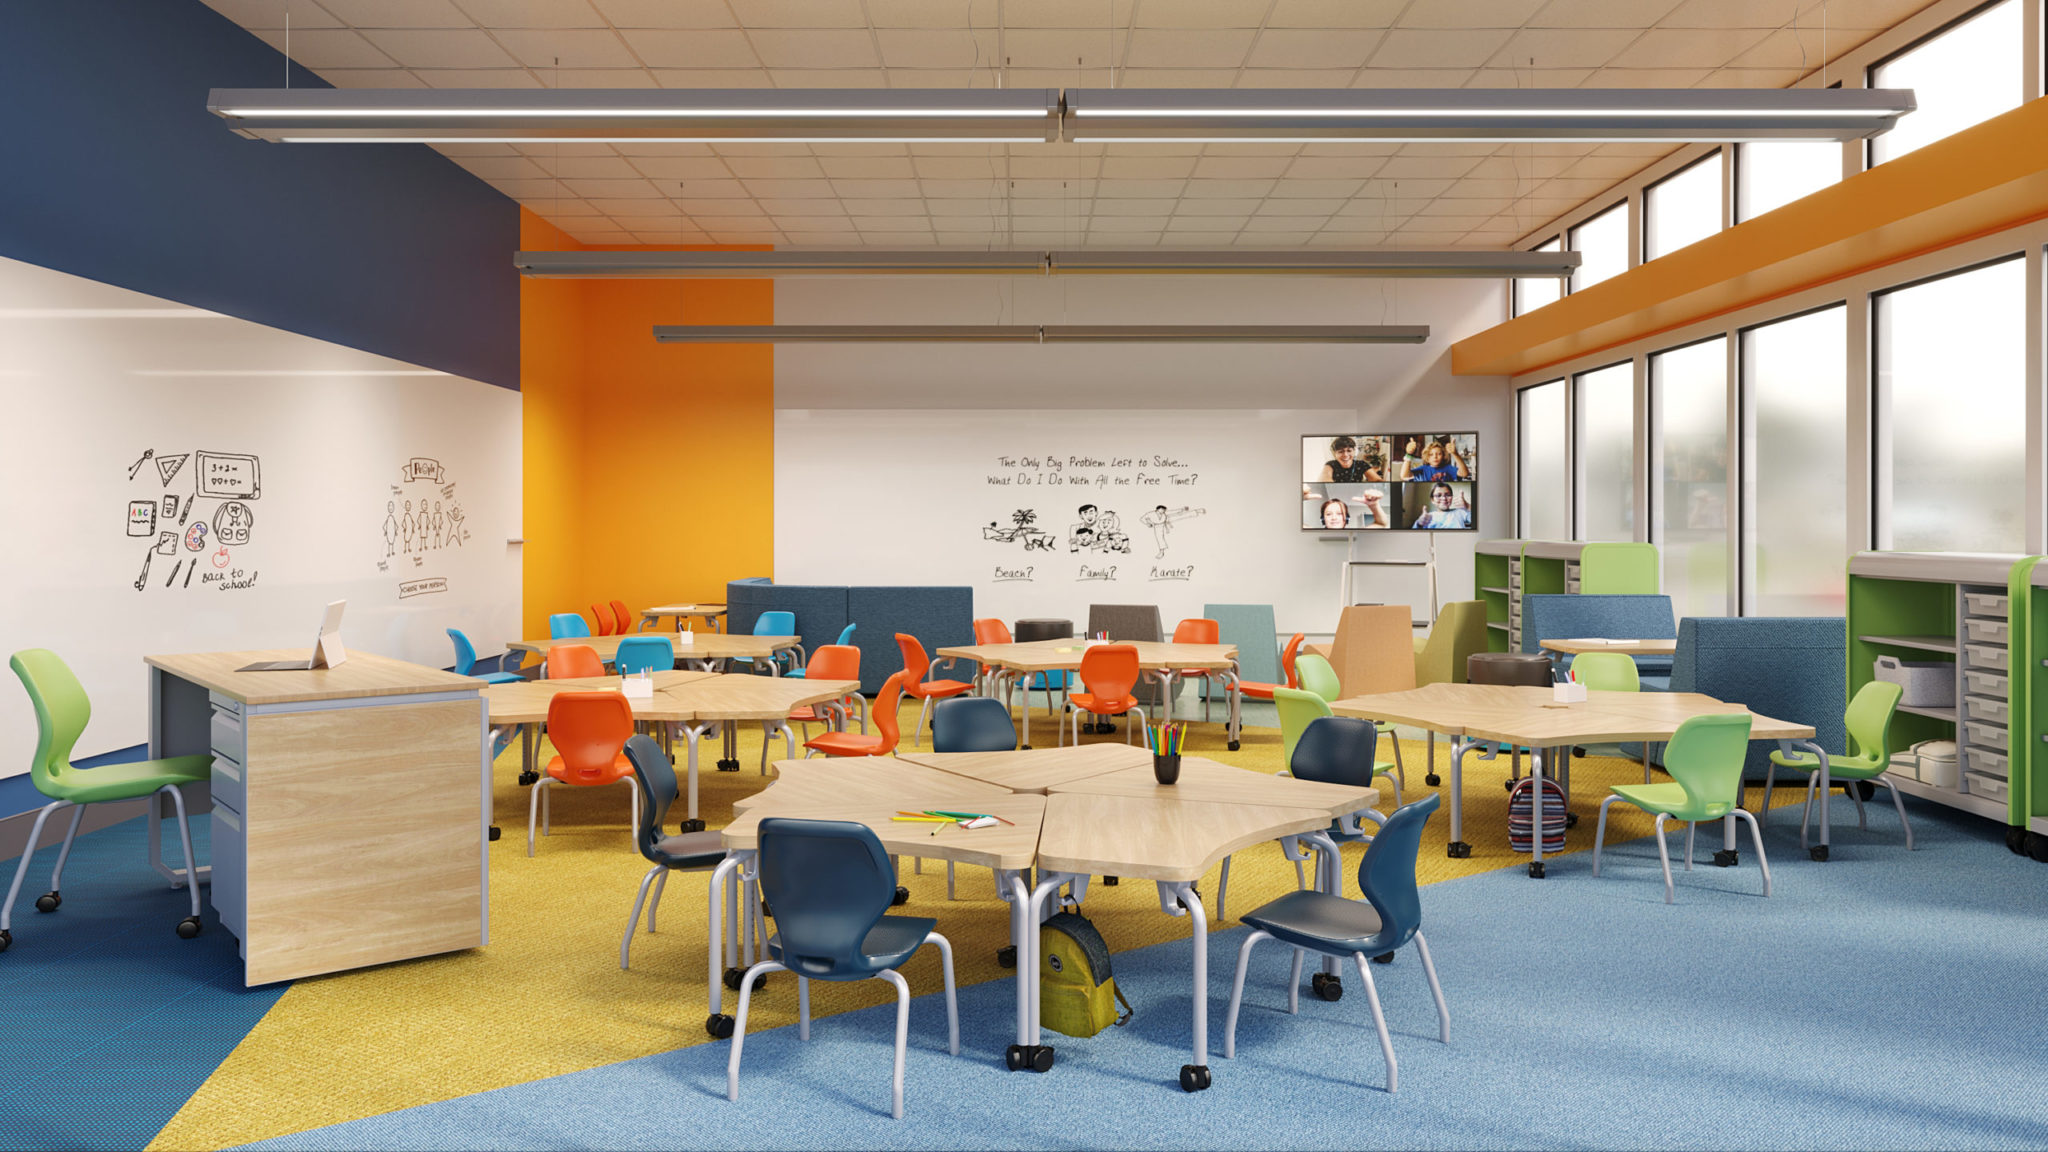 A photograph of a PreK classroom with Smith System furniture